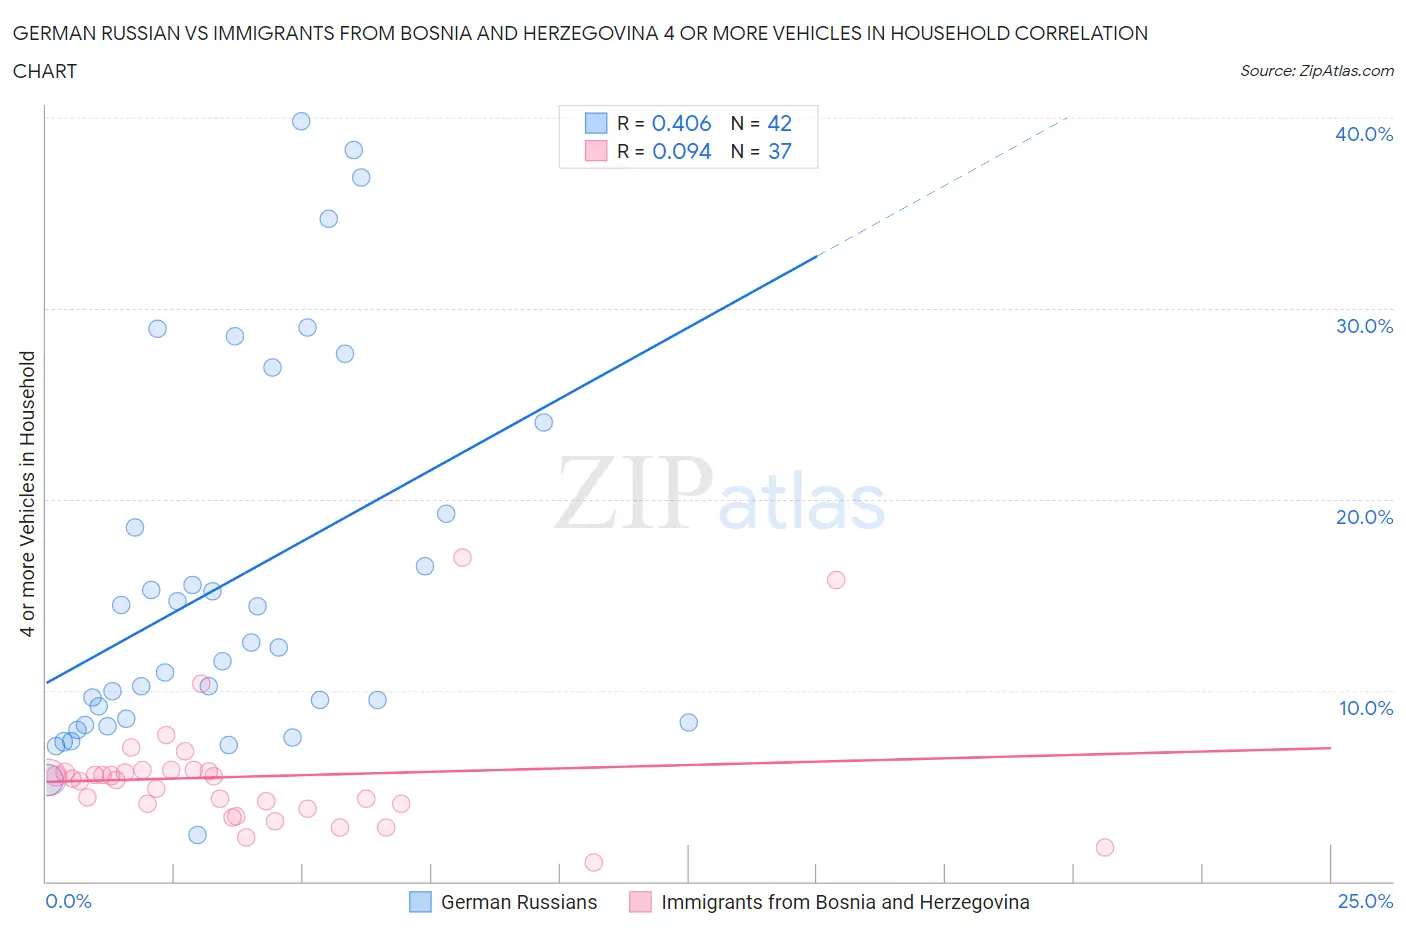 German Russian vs Immigrants from Bosnia and Herzegovina 4 or more Vehicles in Household